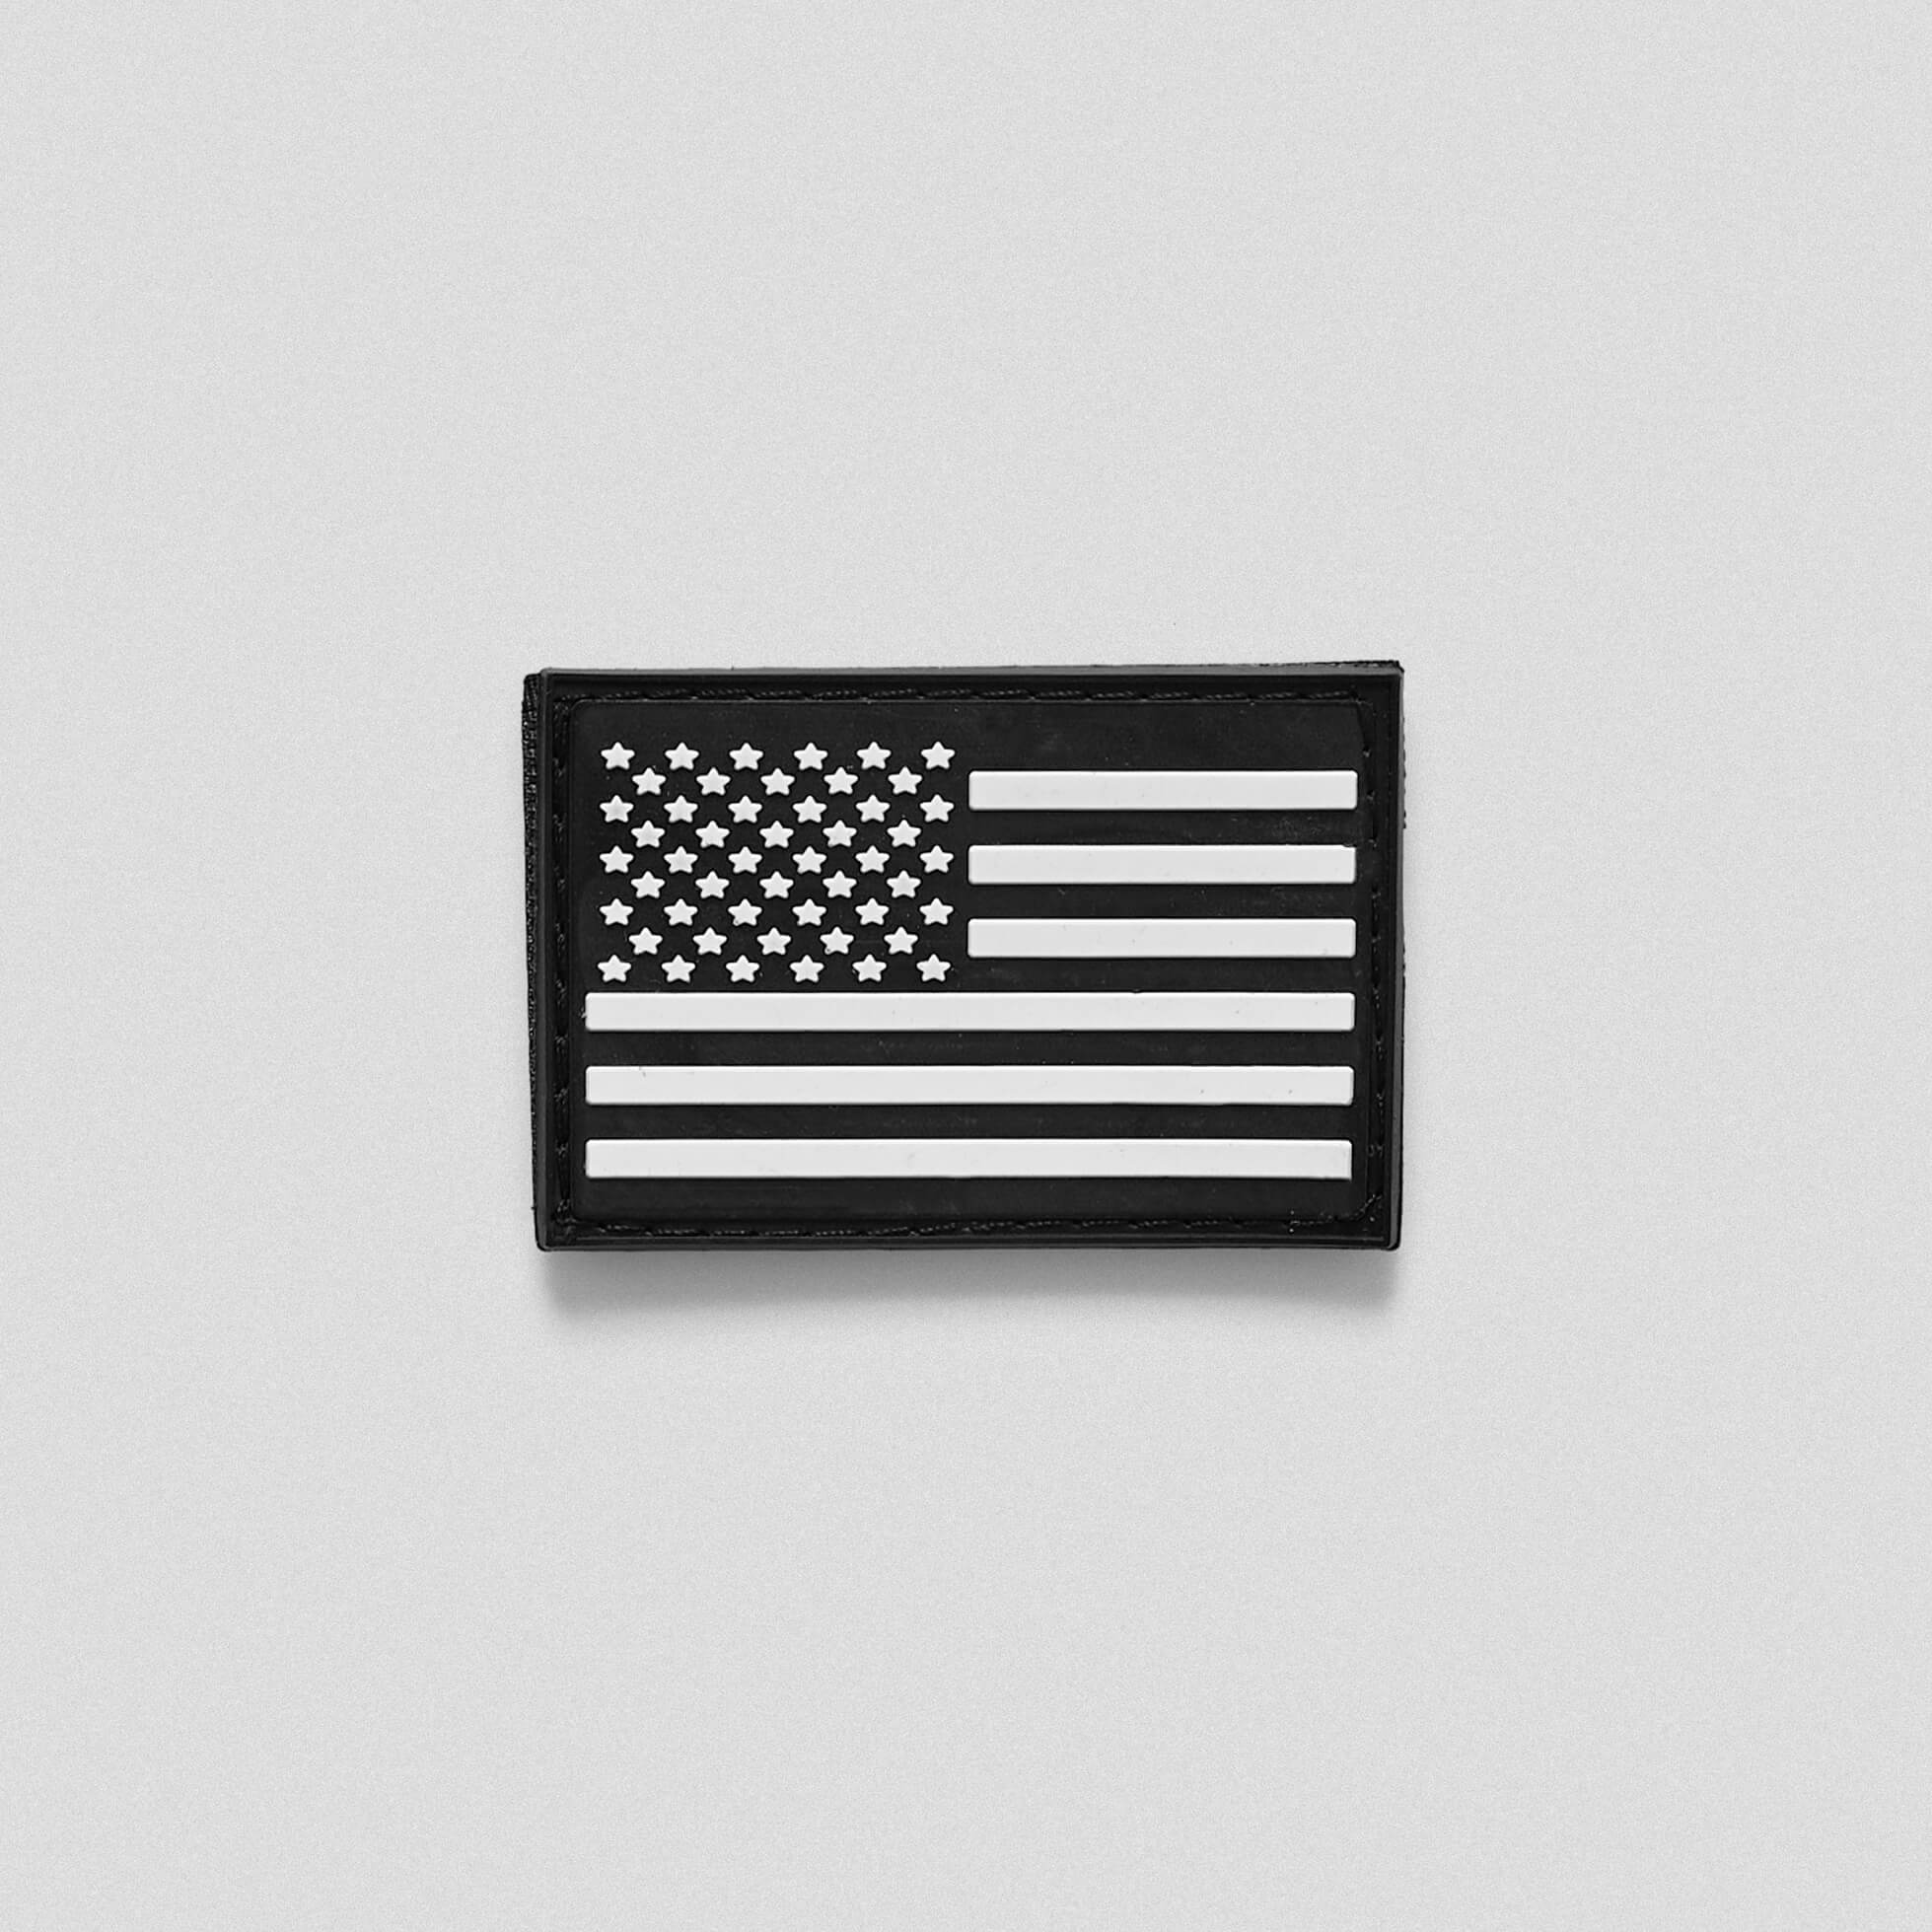 A black and white patch with the USA flag in the center.